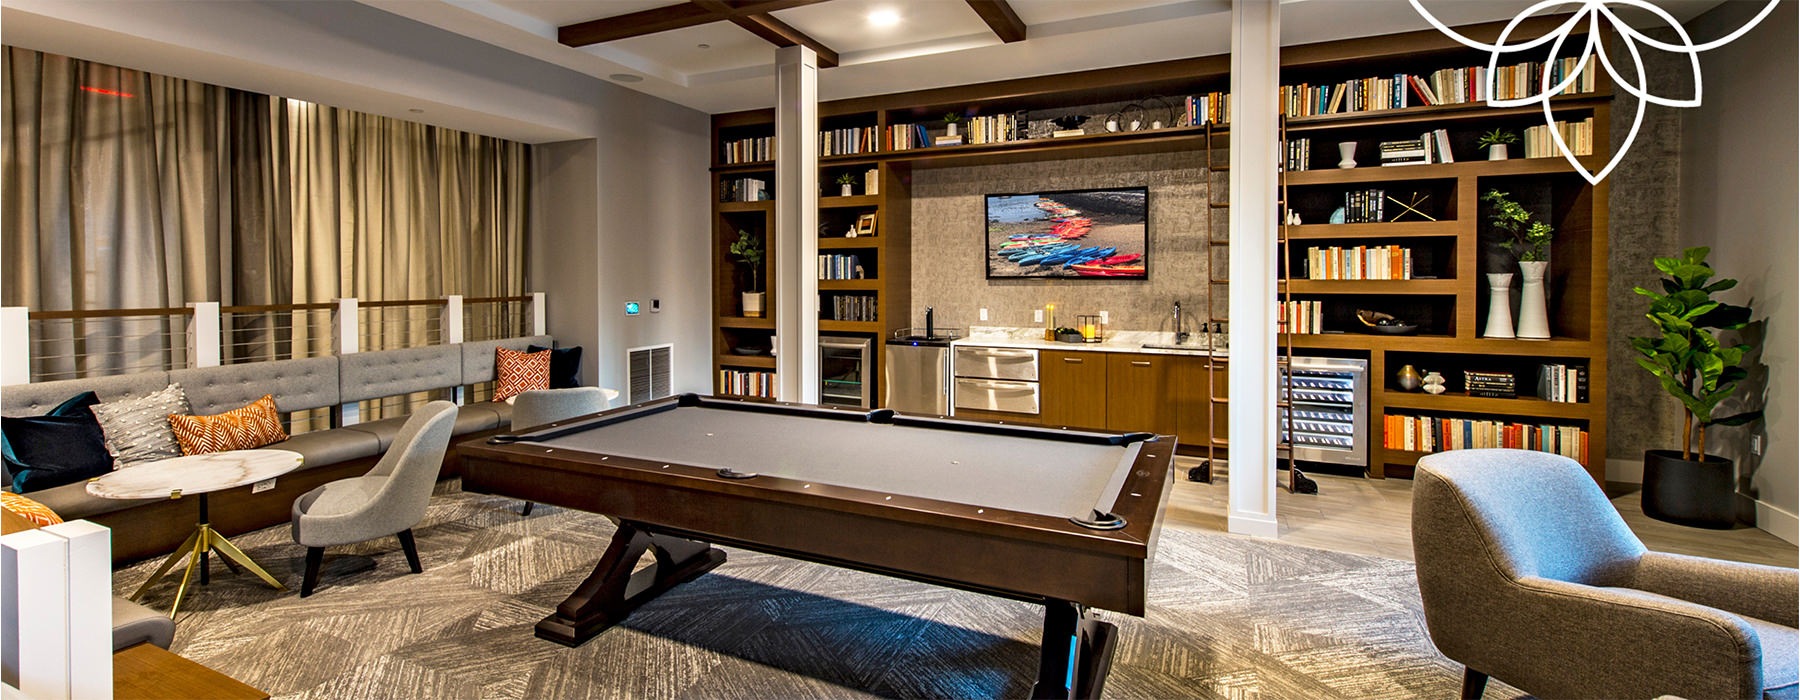 resident lounge with pool table and tv